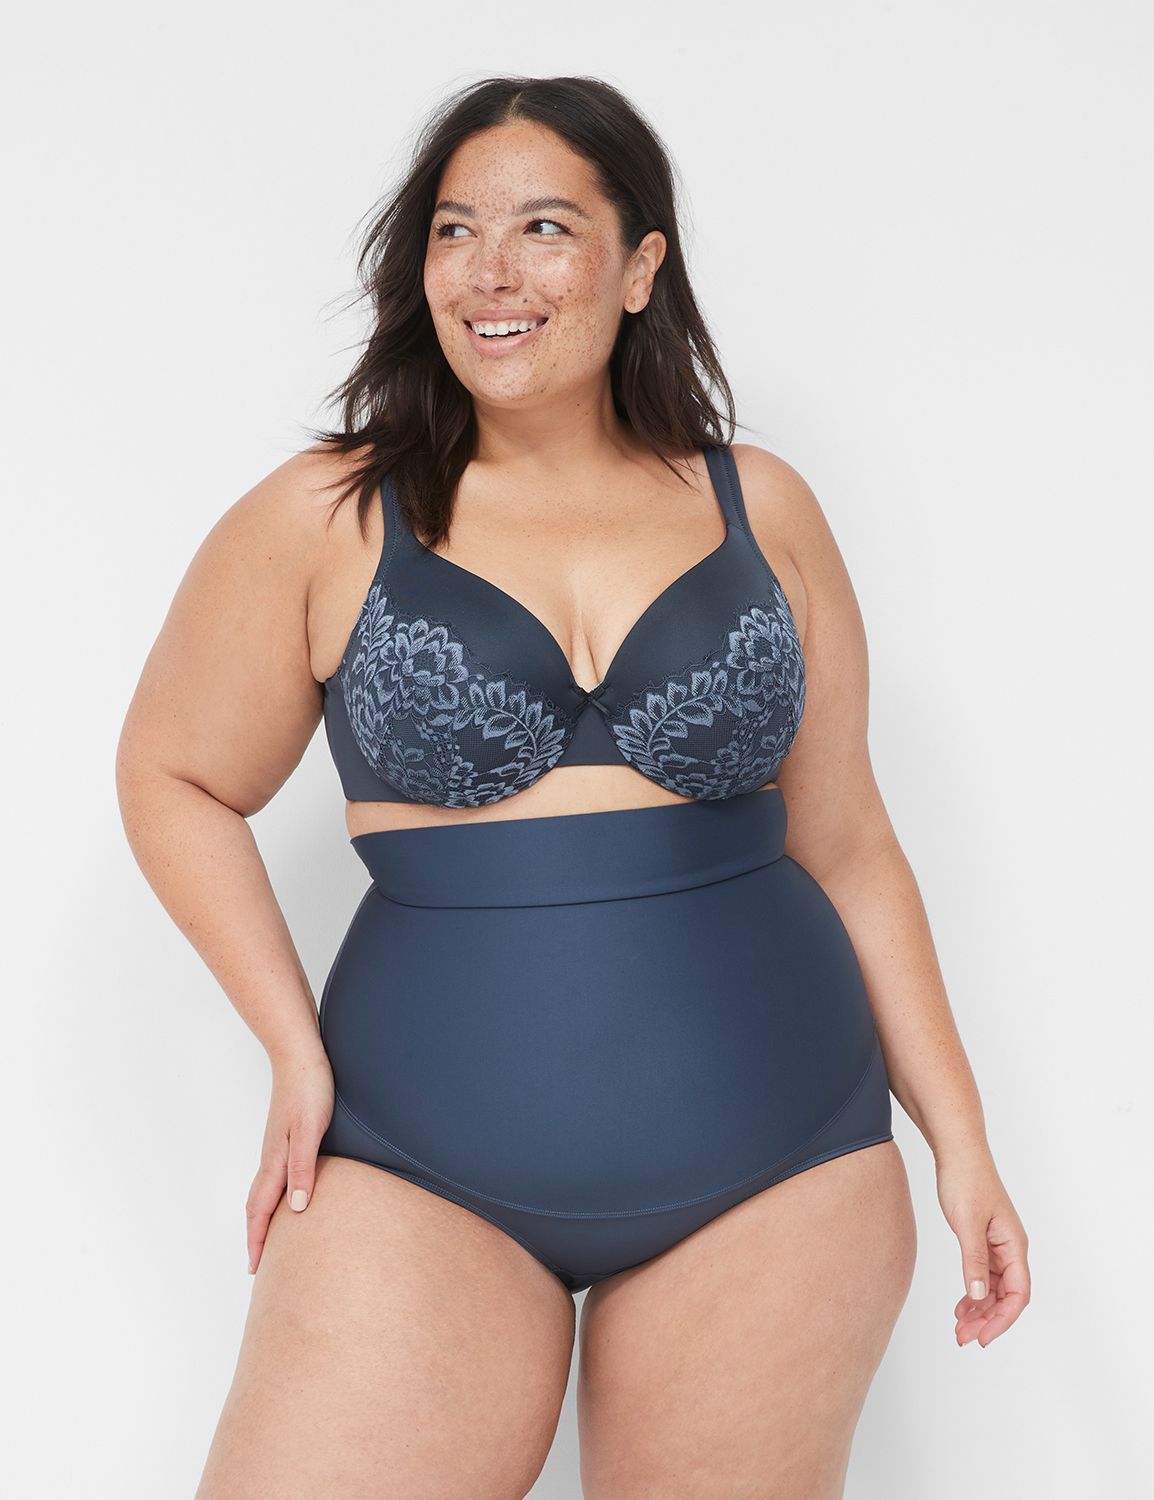 Lane Bryant Discounted Nearly 1,000 Items Up to 75% Off, Including